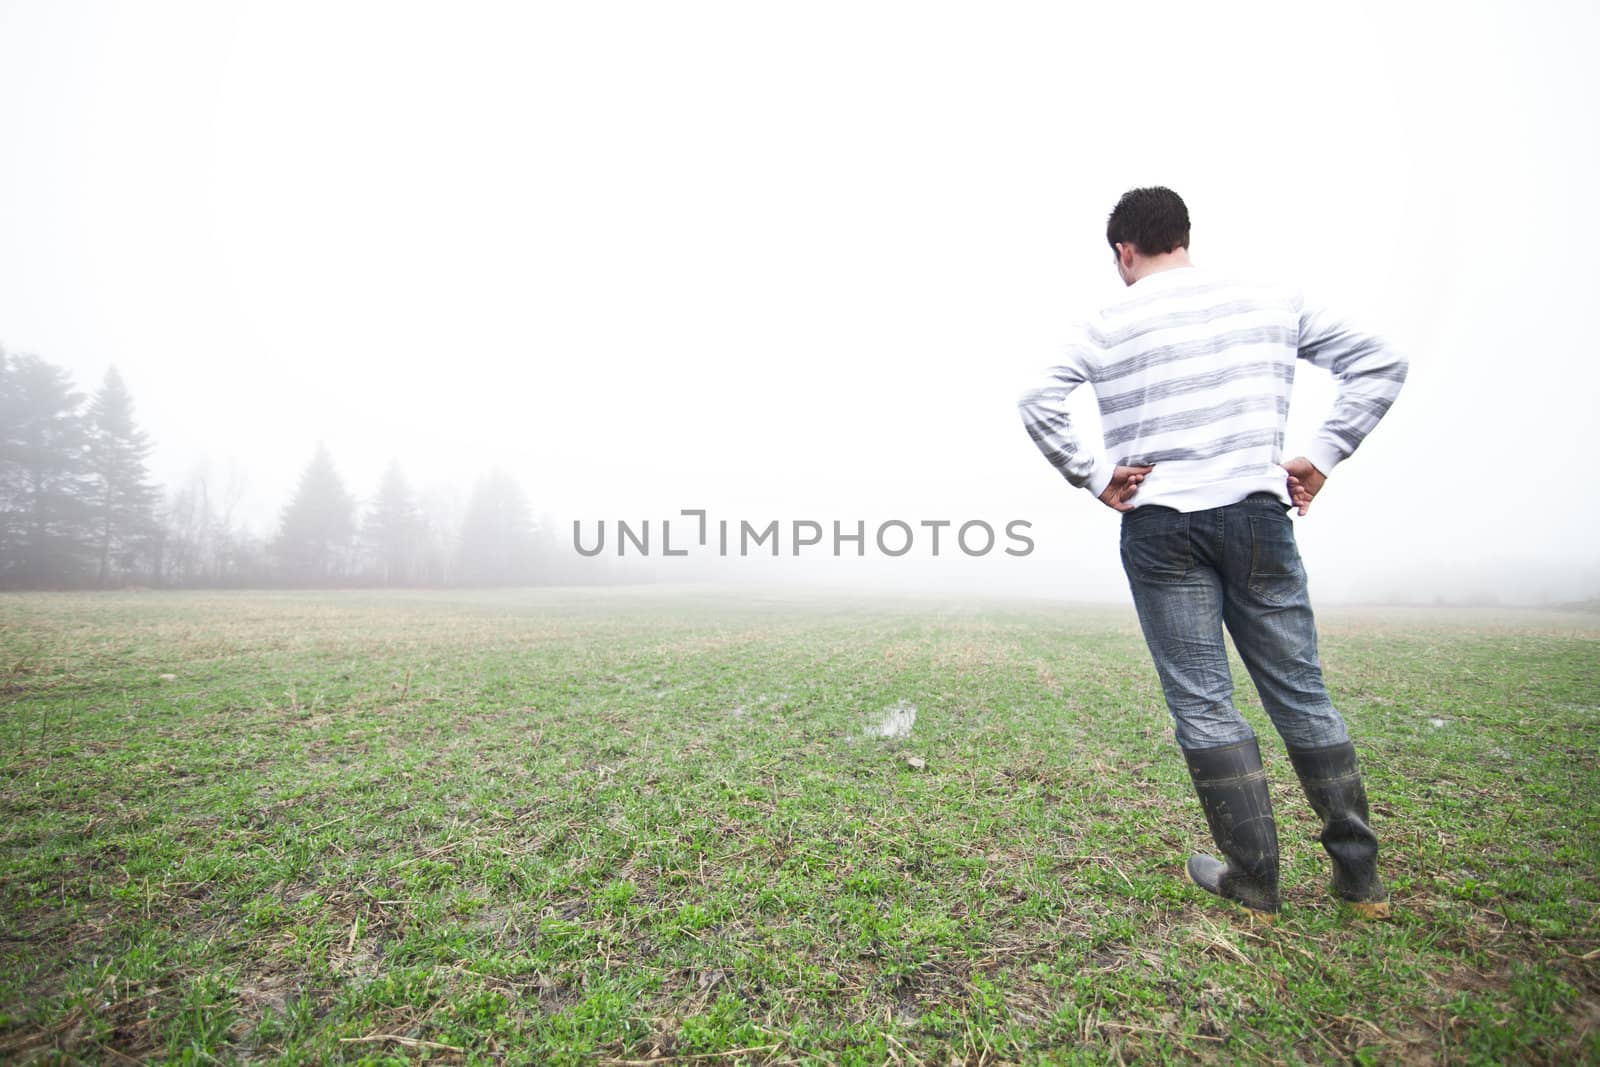 Young adult in a foggy and wet field